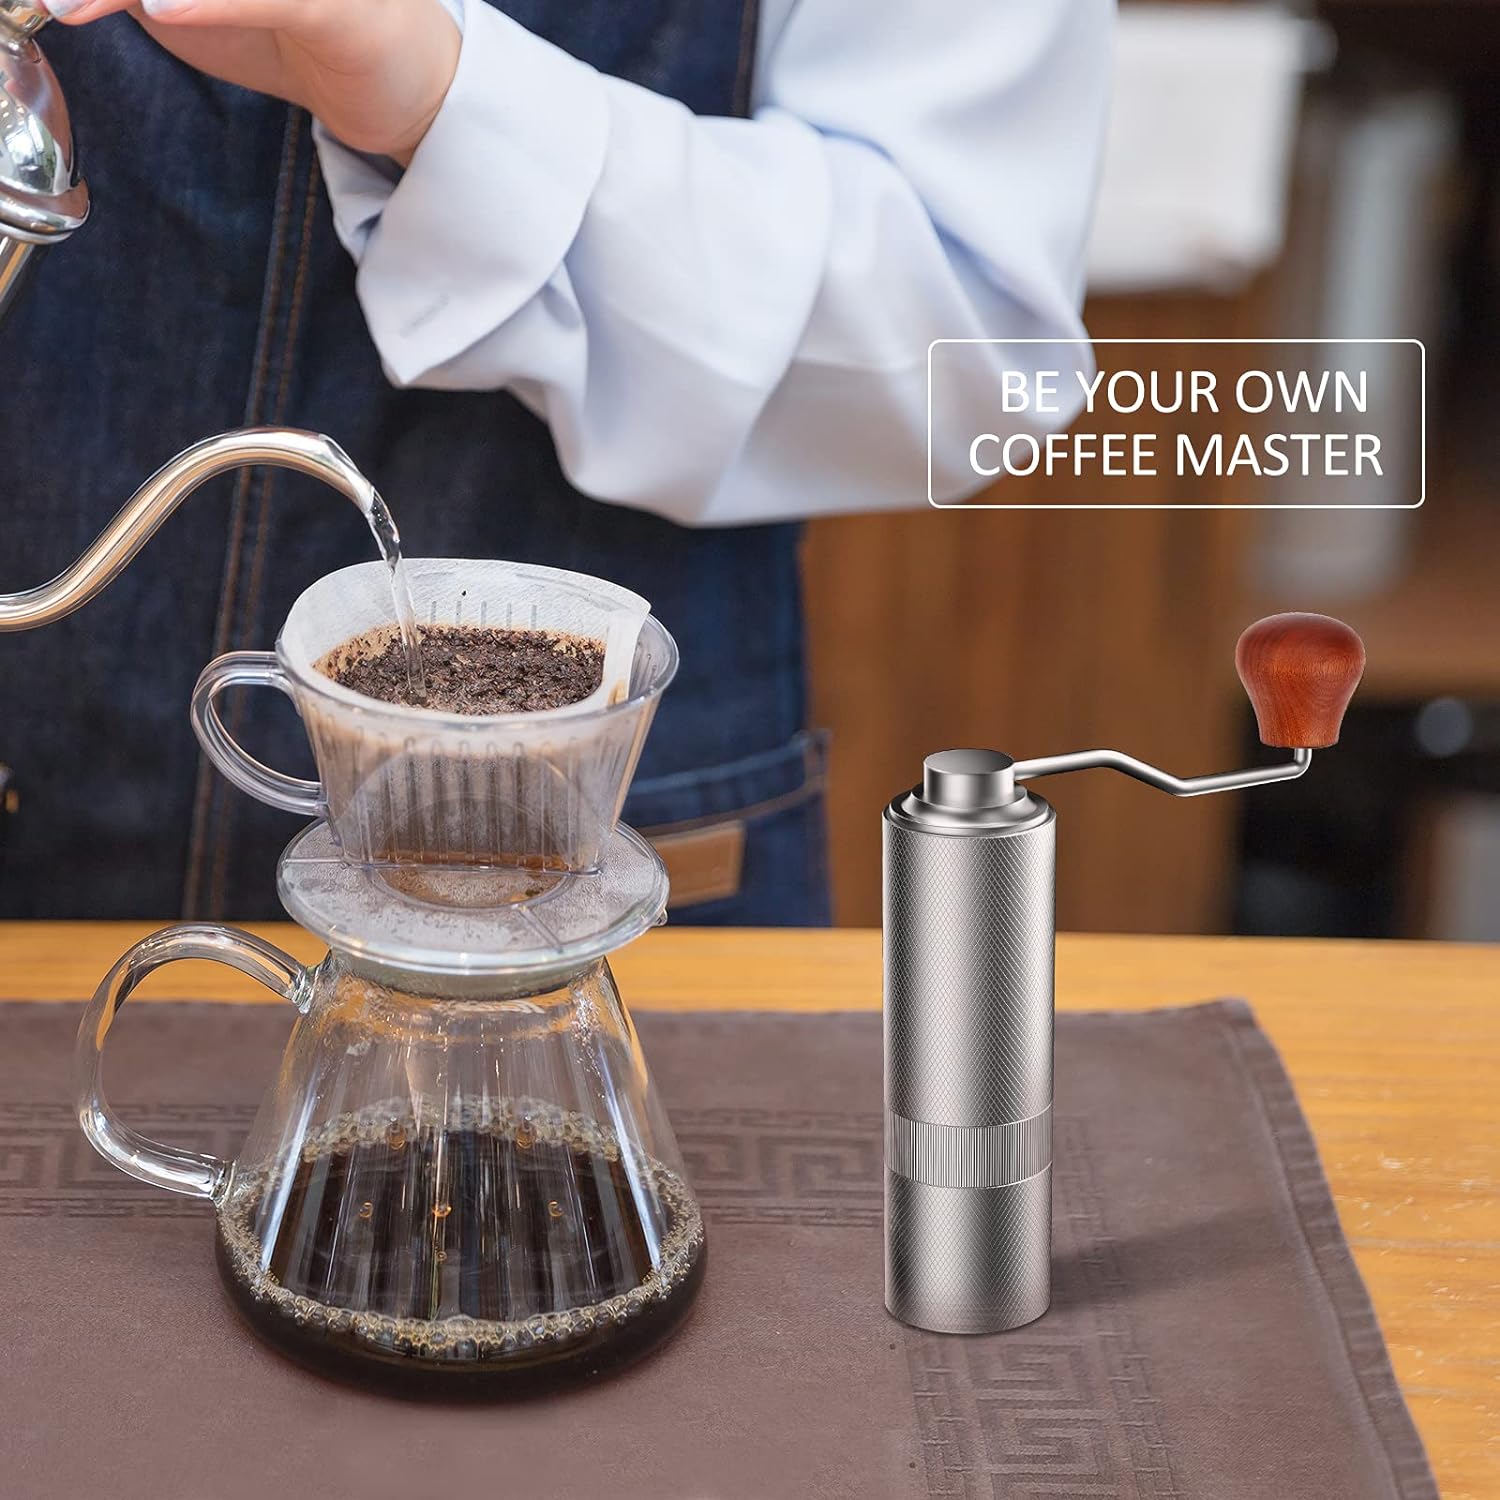 OMMO Manual Coffee Grinder Drip Coffee Burr Coffee Grinder with Adjustable Grind Setting Capacity 25g French Press Conical Stainless Steel Burr Hand Coffee Bean Grinder for Espresso 